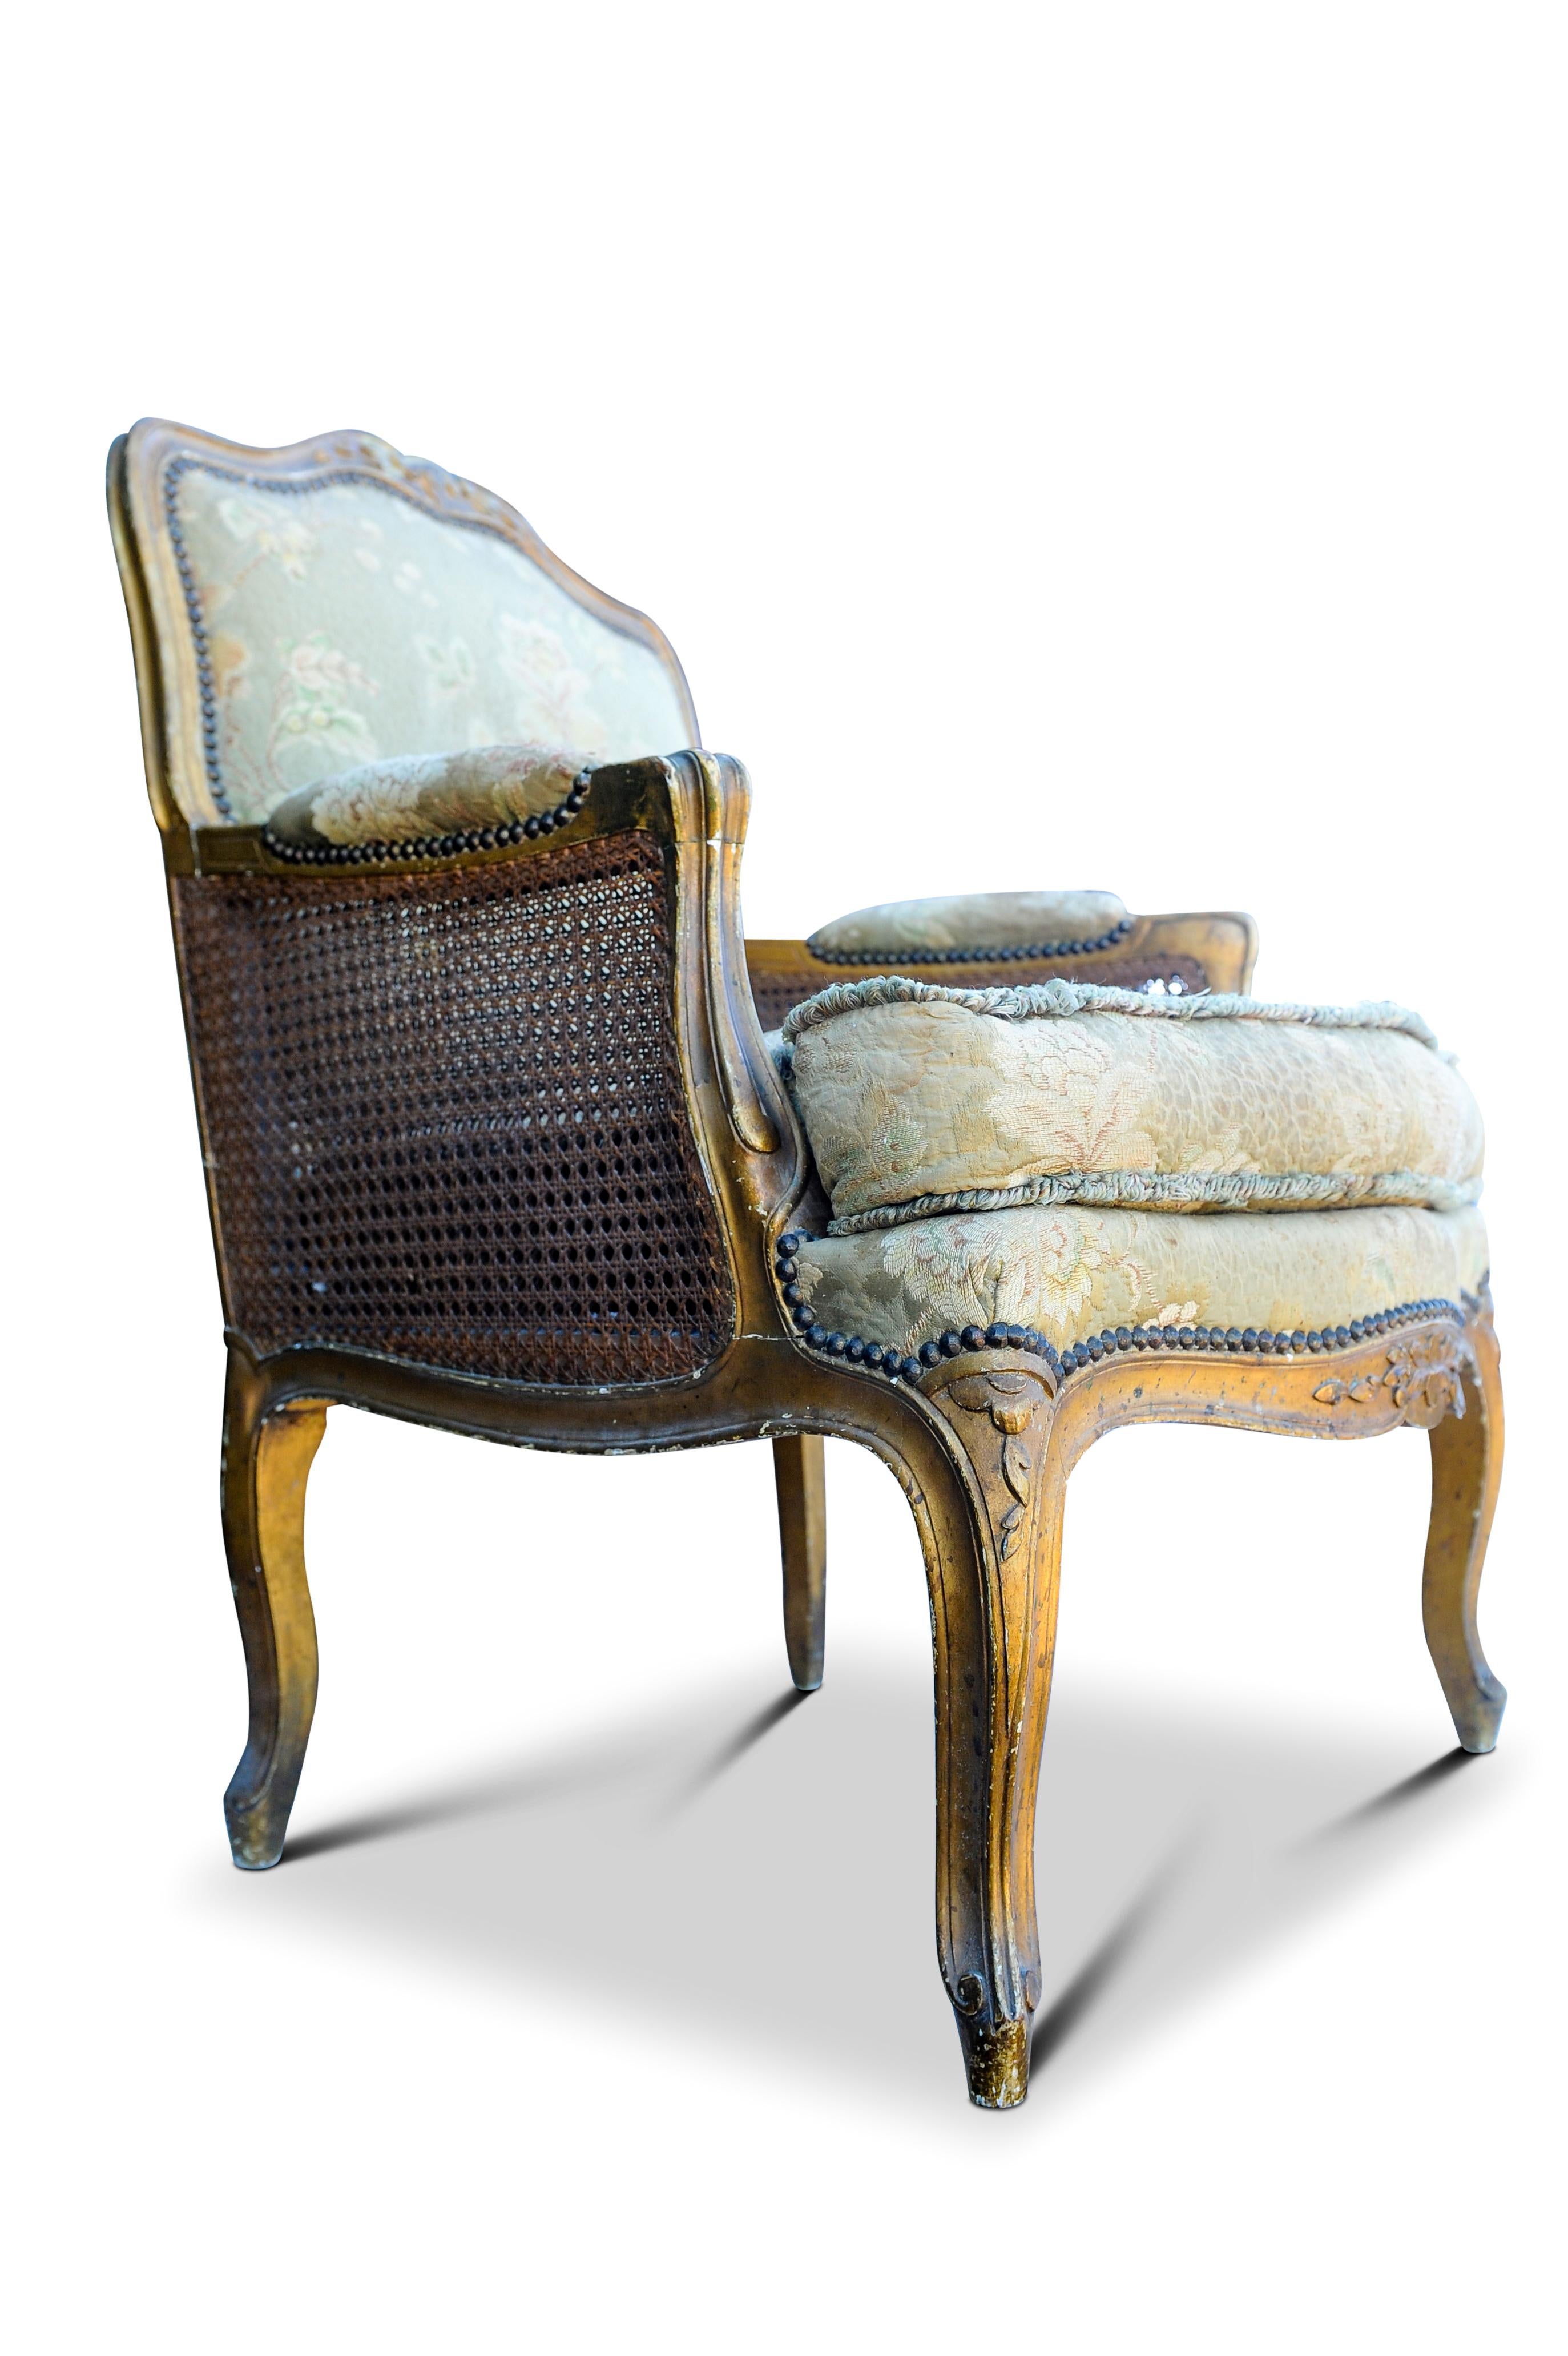 Louis XV Antique 19th Century French Gilded Bergere Armchair with Stud Detailing For Sale